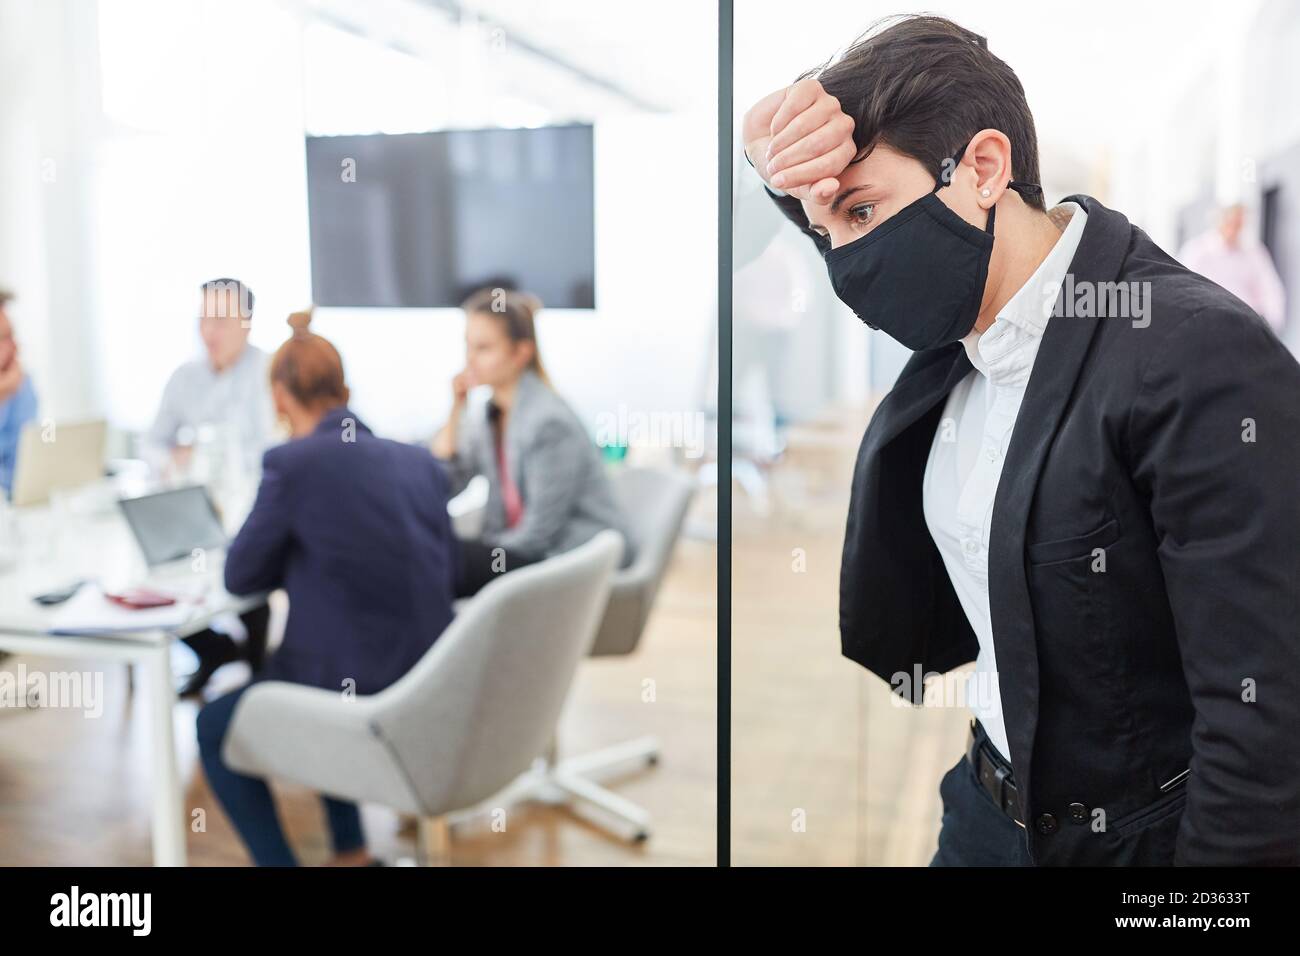 Exhausted business woman with everyday mask leans tiredly against a glass wall Stock Photo